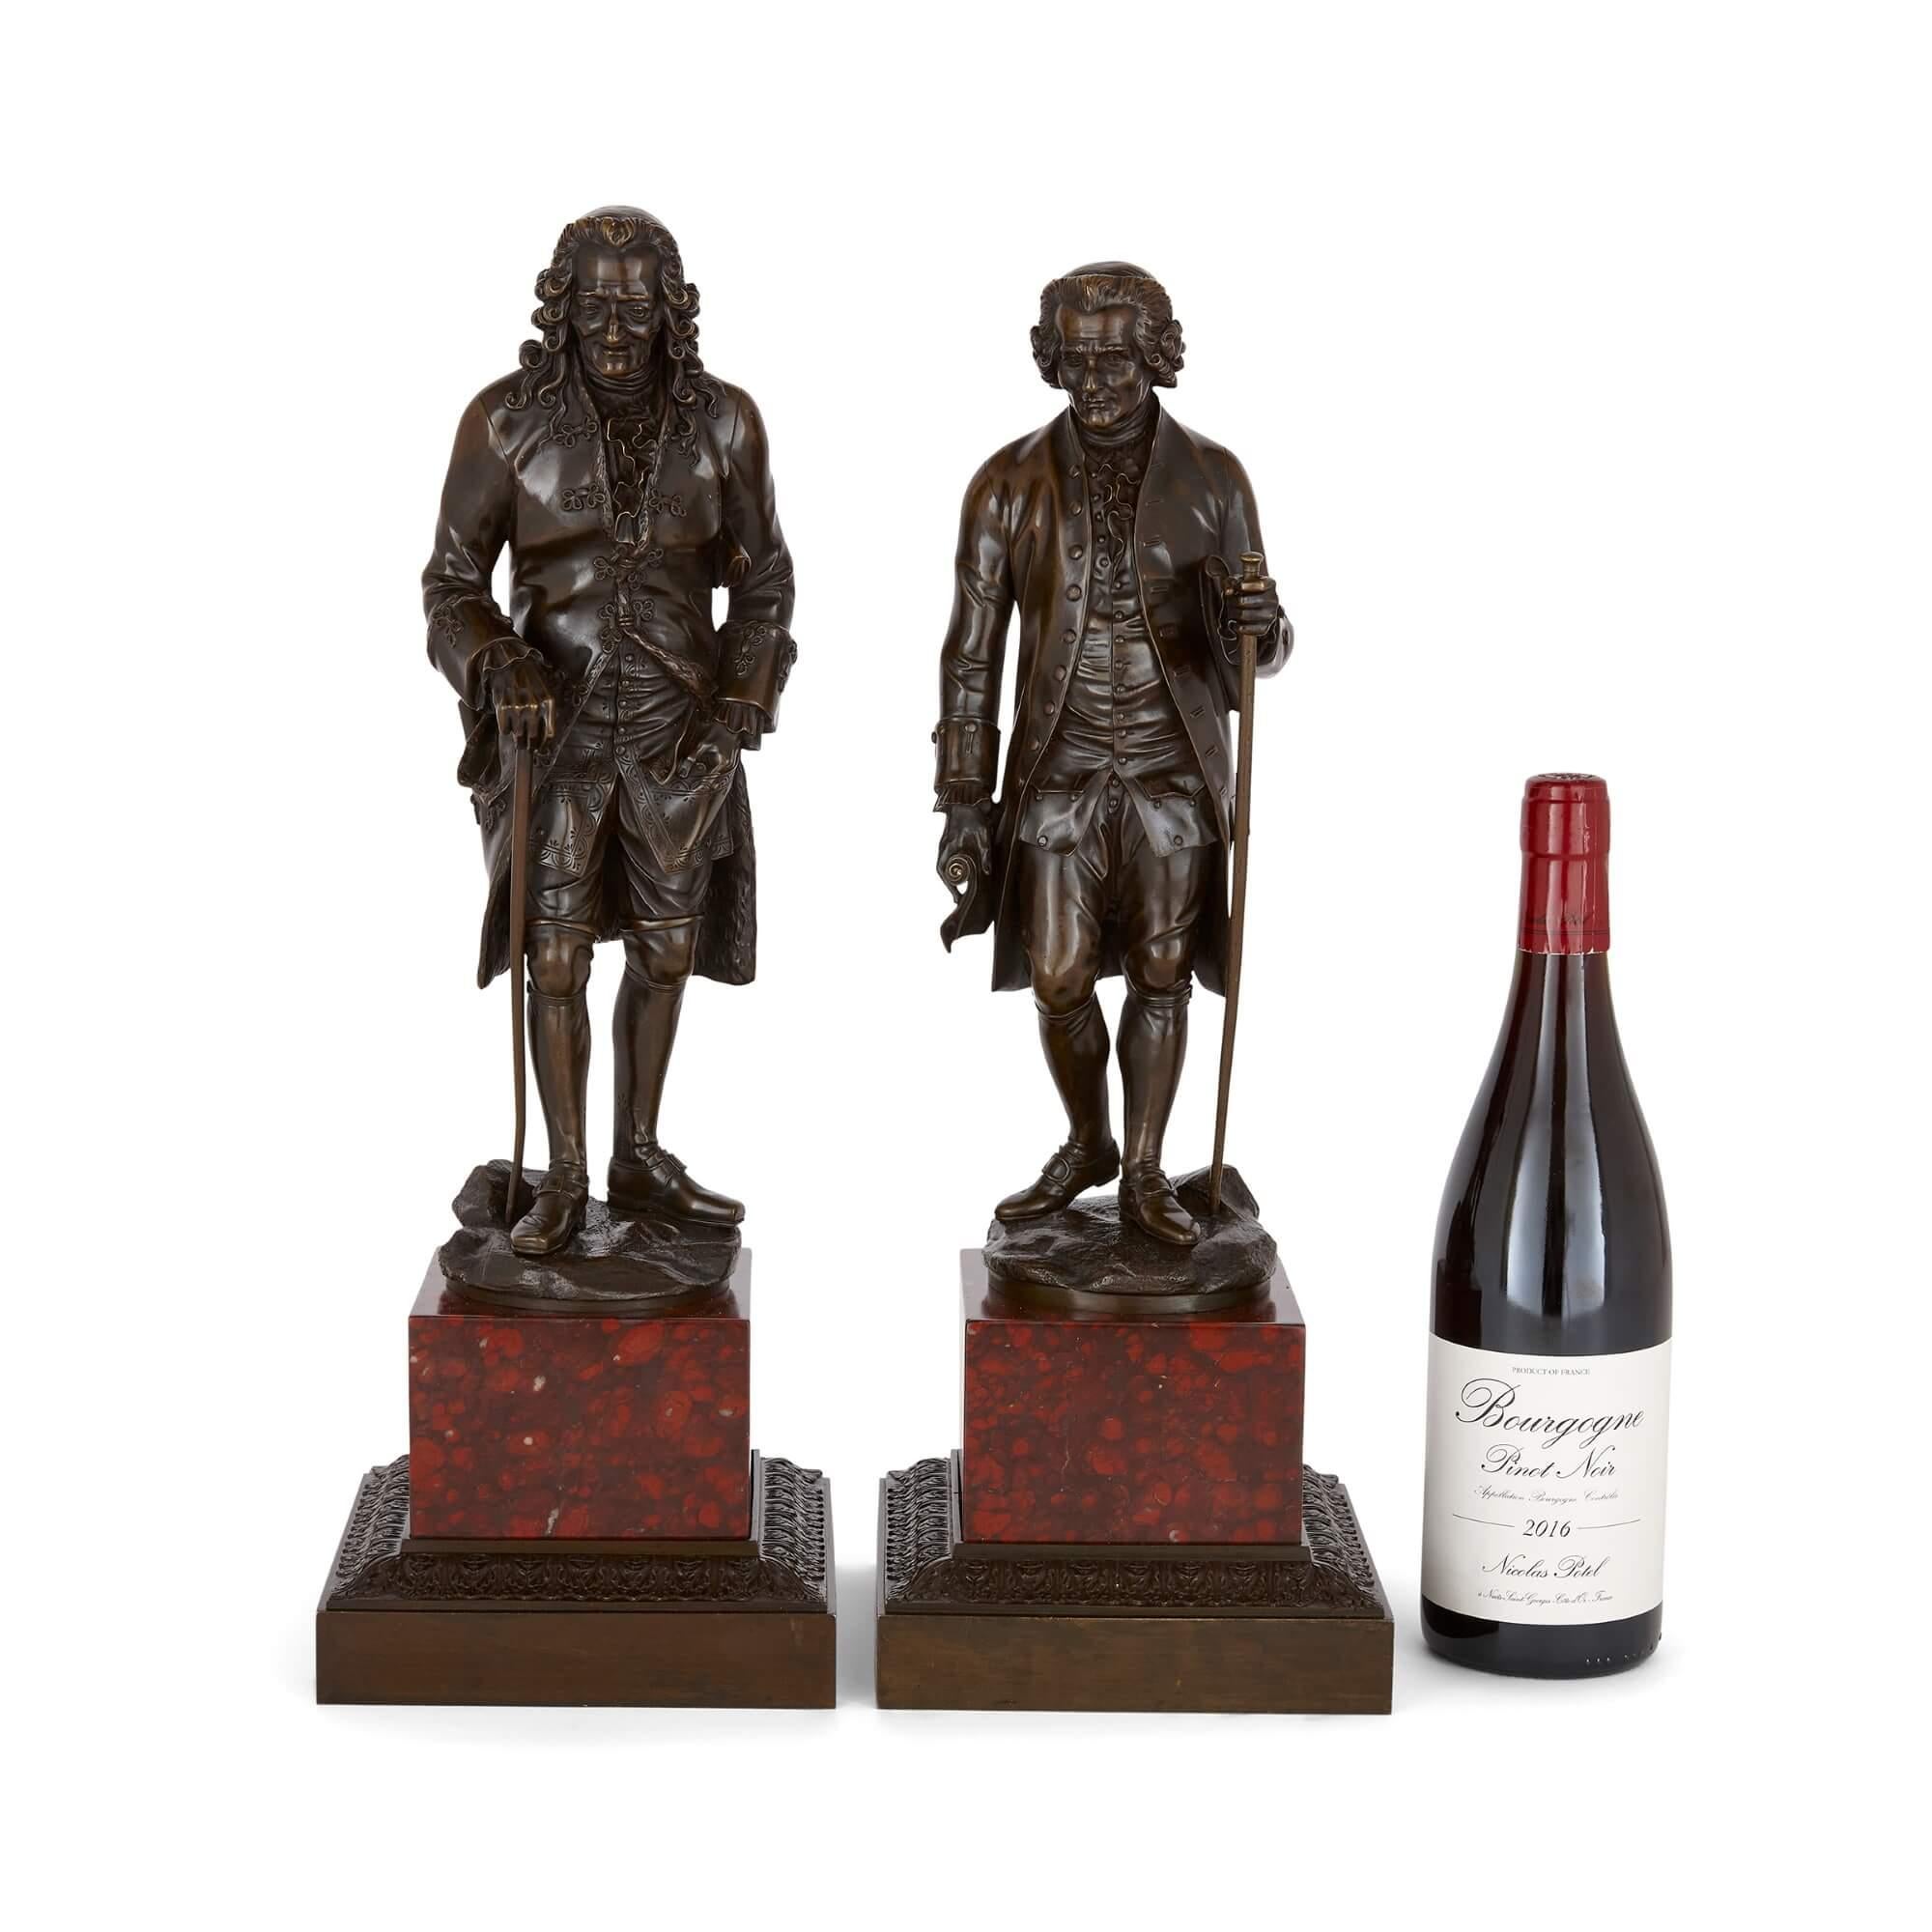 Pair of French Patinated-Bronze Sculptures of Voltaire and Rousseau For Sale 3